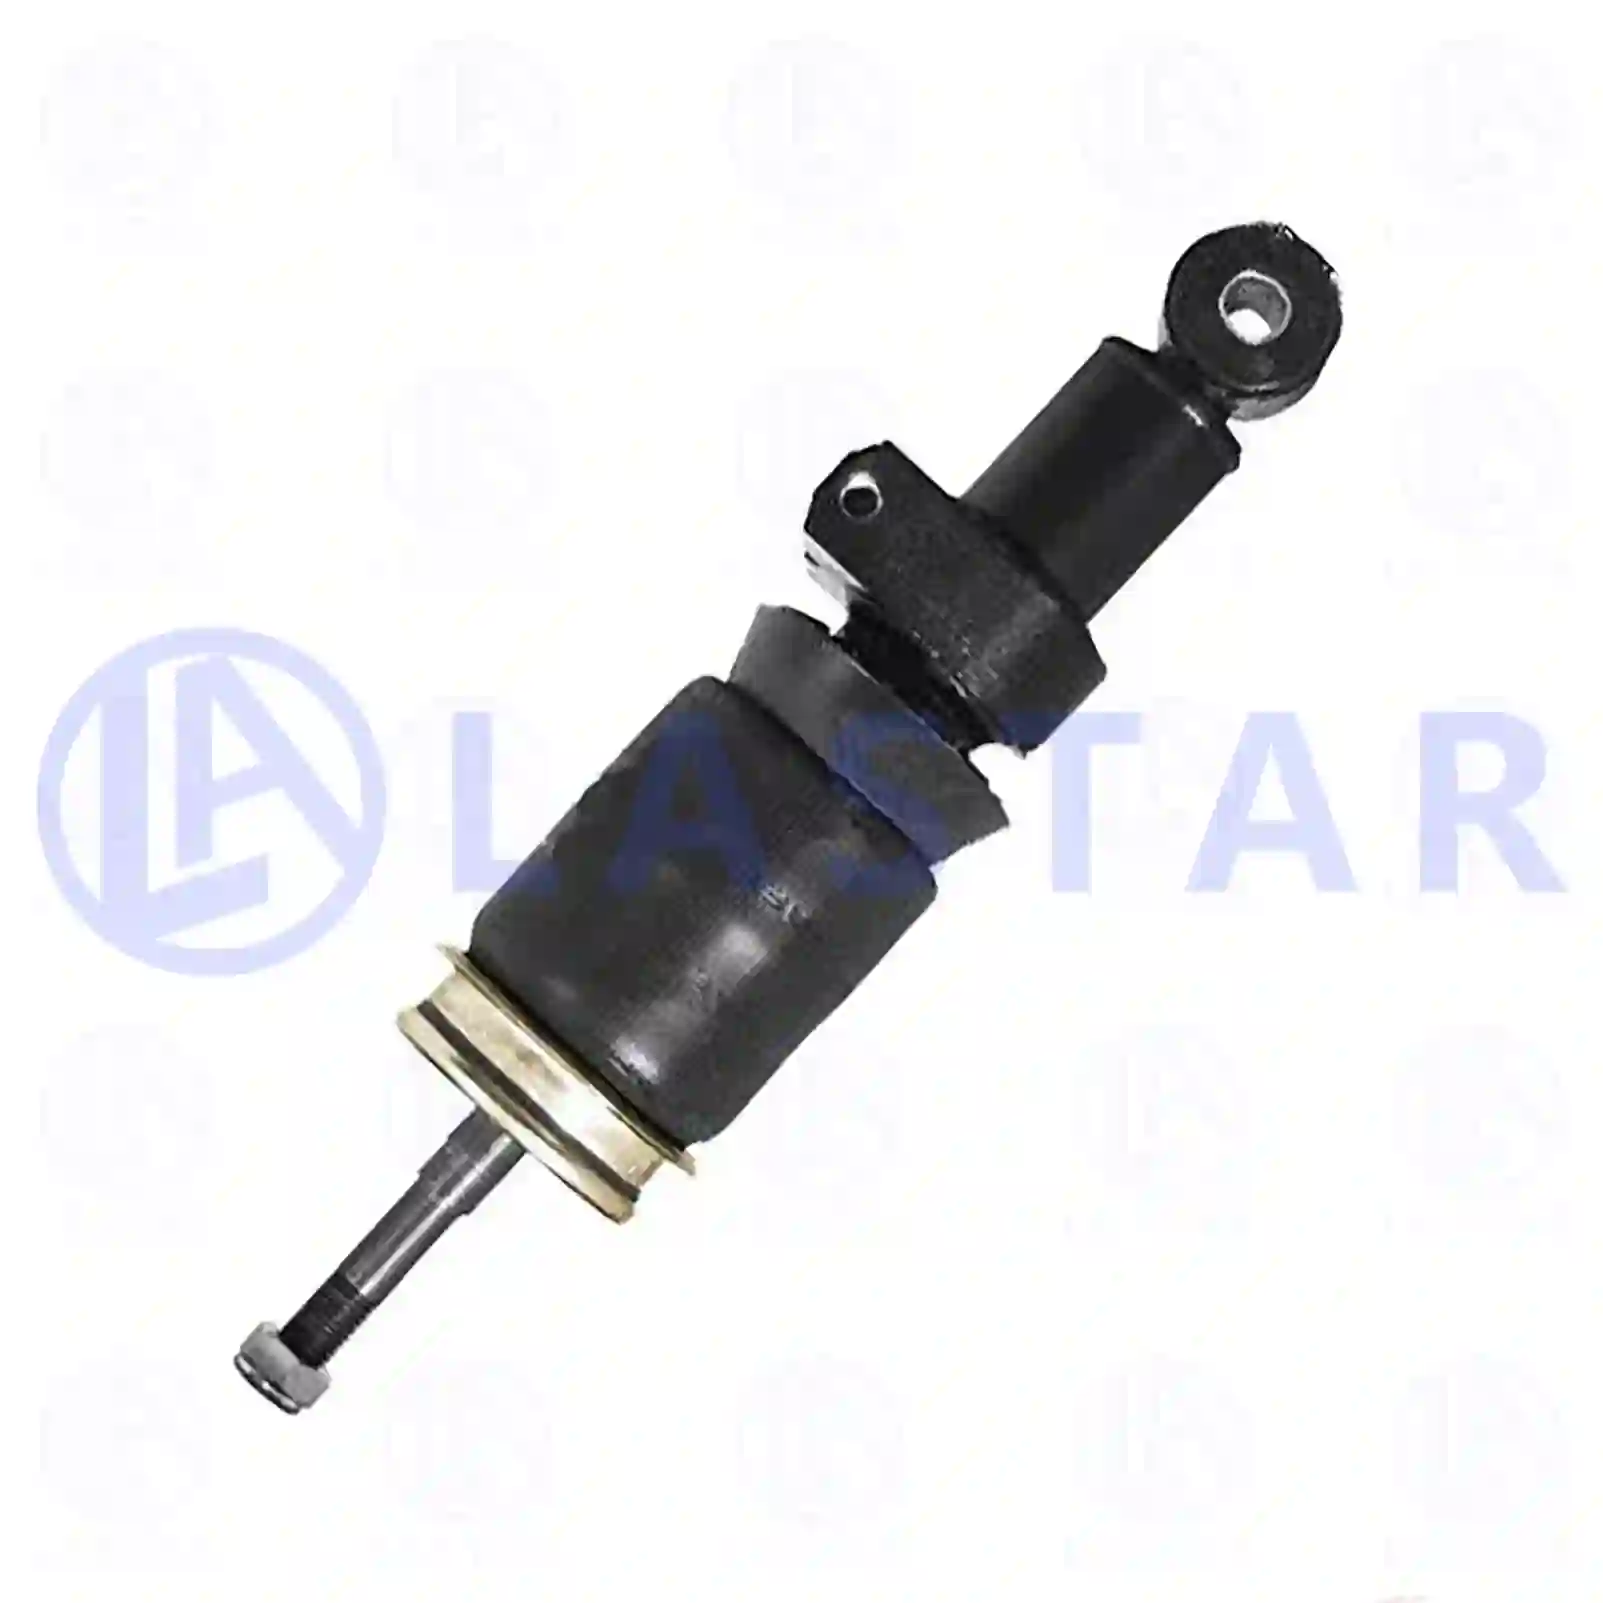 Cabin shock absorber, with air bellow, 77735599, 500307337, 500307338, 500352808, 500379698, 98472734, 99438514, 99455937 ||  77735599 Lastar Spare Part | Truck Spare Parts, Auotomotive Spare Parts Cabin shock absorber, with air bellow, 77735599, 500307337, 500307338, 500352808, 500379698, 98472734, 99438514, 99455937 ||  77735599 Lastar Spare Part | Truck Spare Parts, Auotomotive Spare Parts